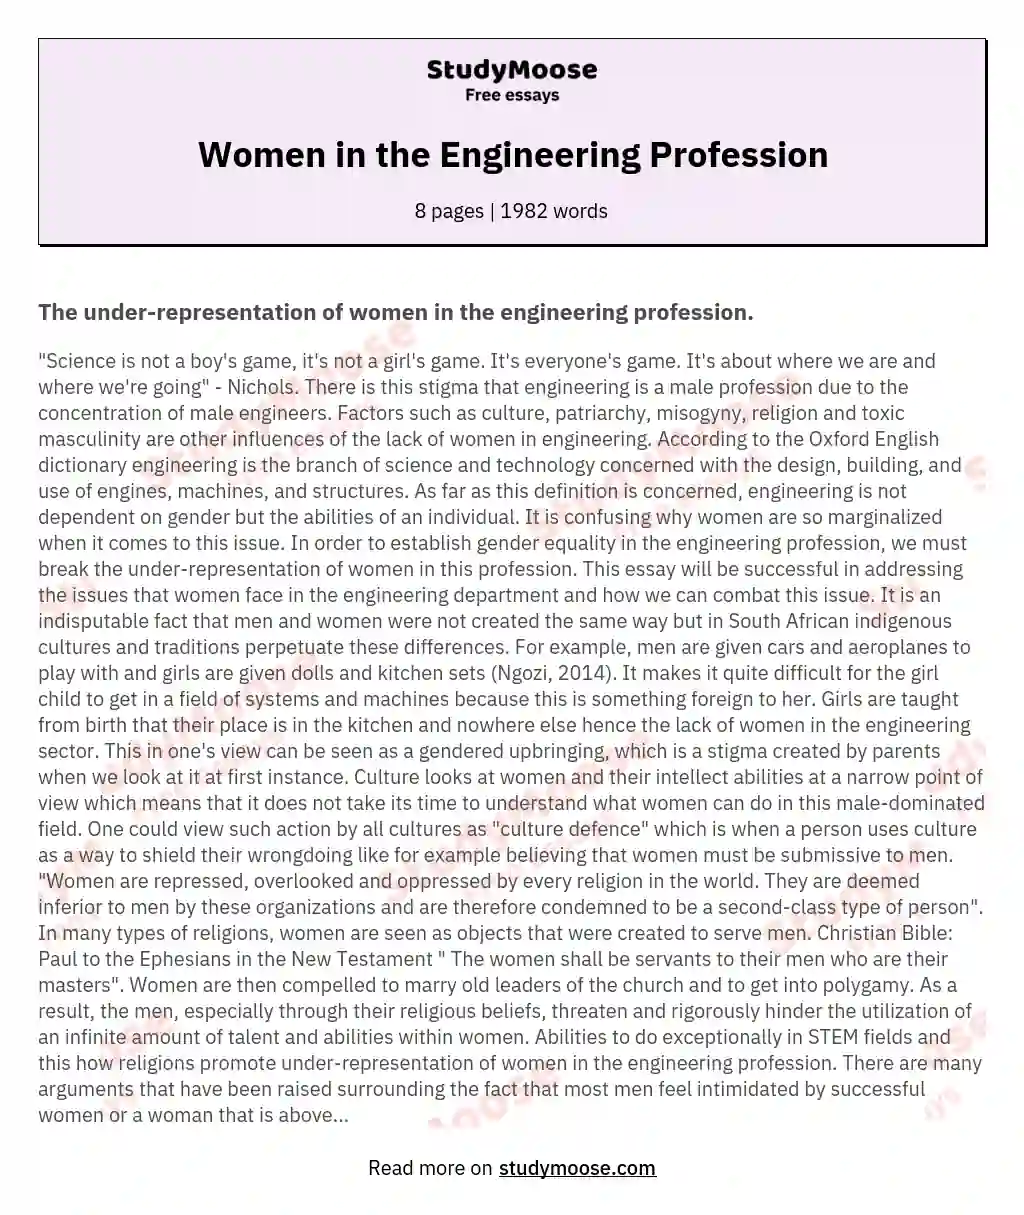 Women in the Engineering Profession essay